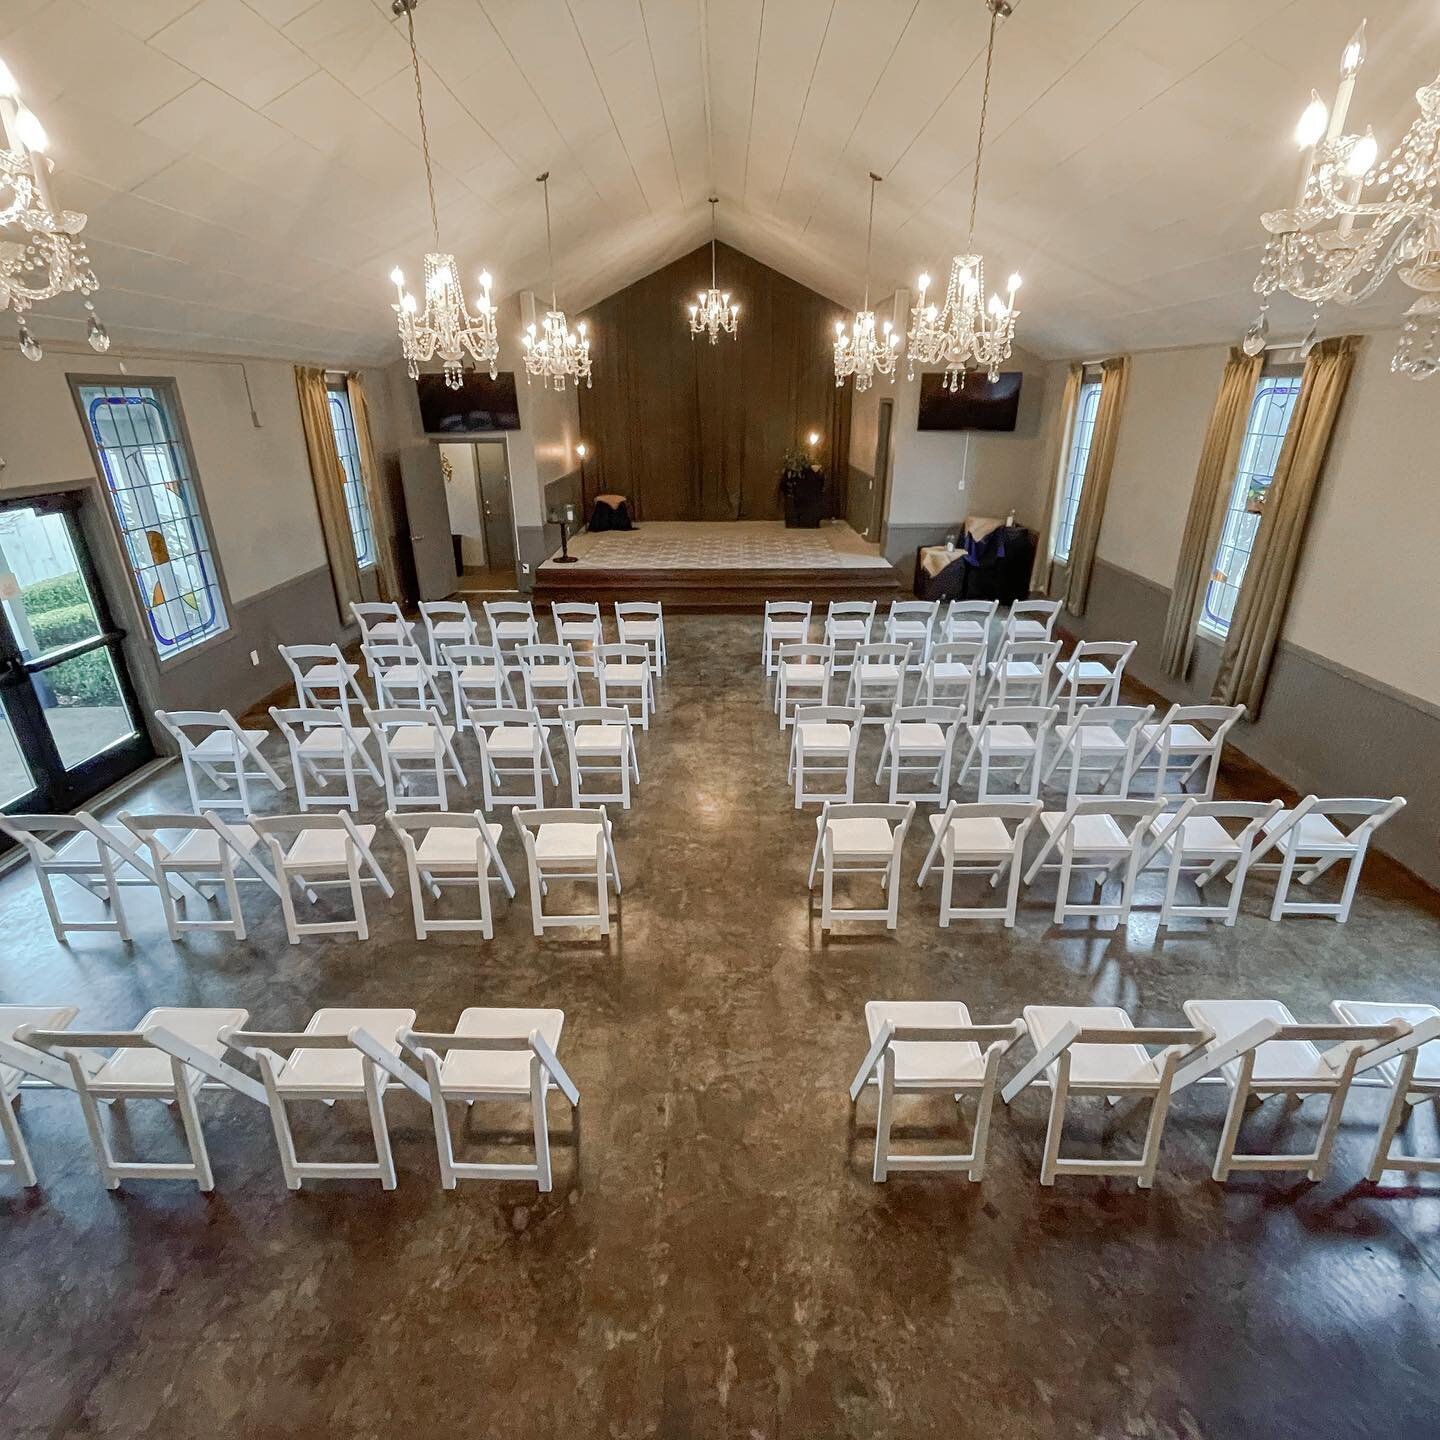 Theatre style seating for 50. We love how flexible the space is to different sized groups. 

#Events #Eventplanning #Sherwoodoregon #PDX #Eventvenue #PDXEvent